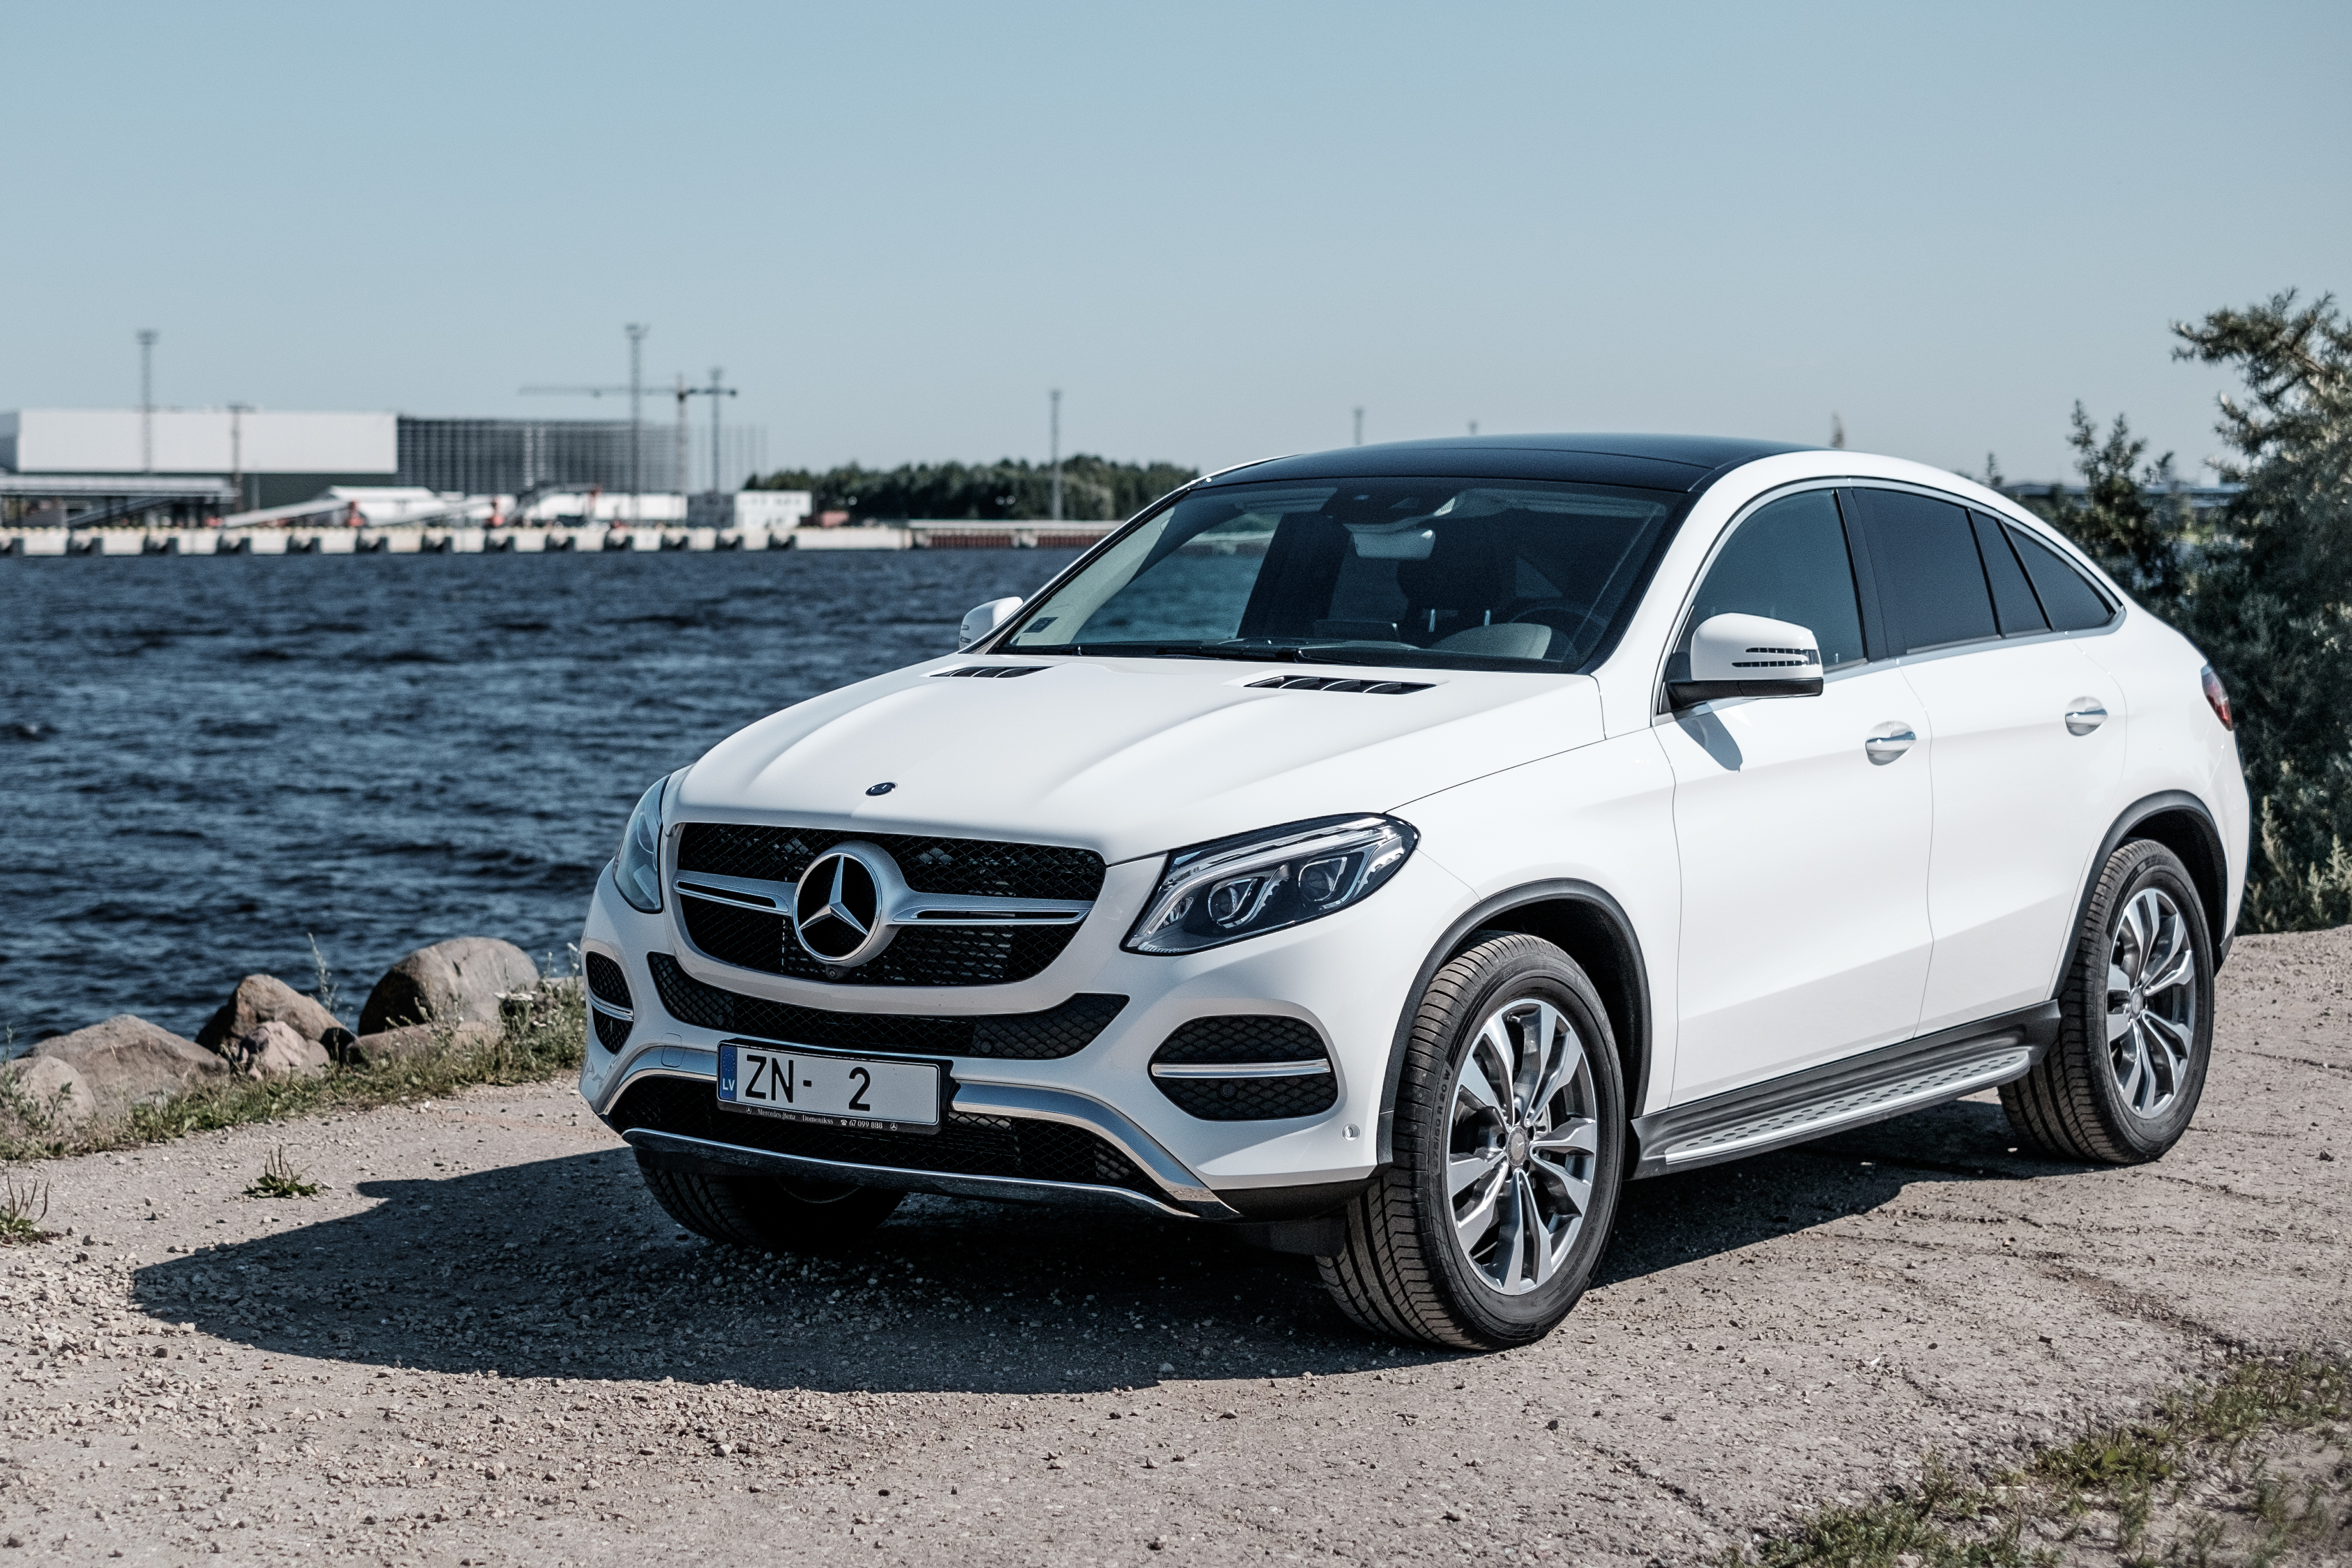 Mercedes GLC-Class Coupe (C253) exterior restyling